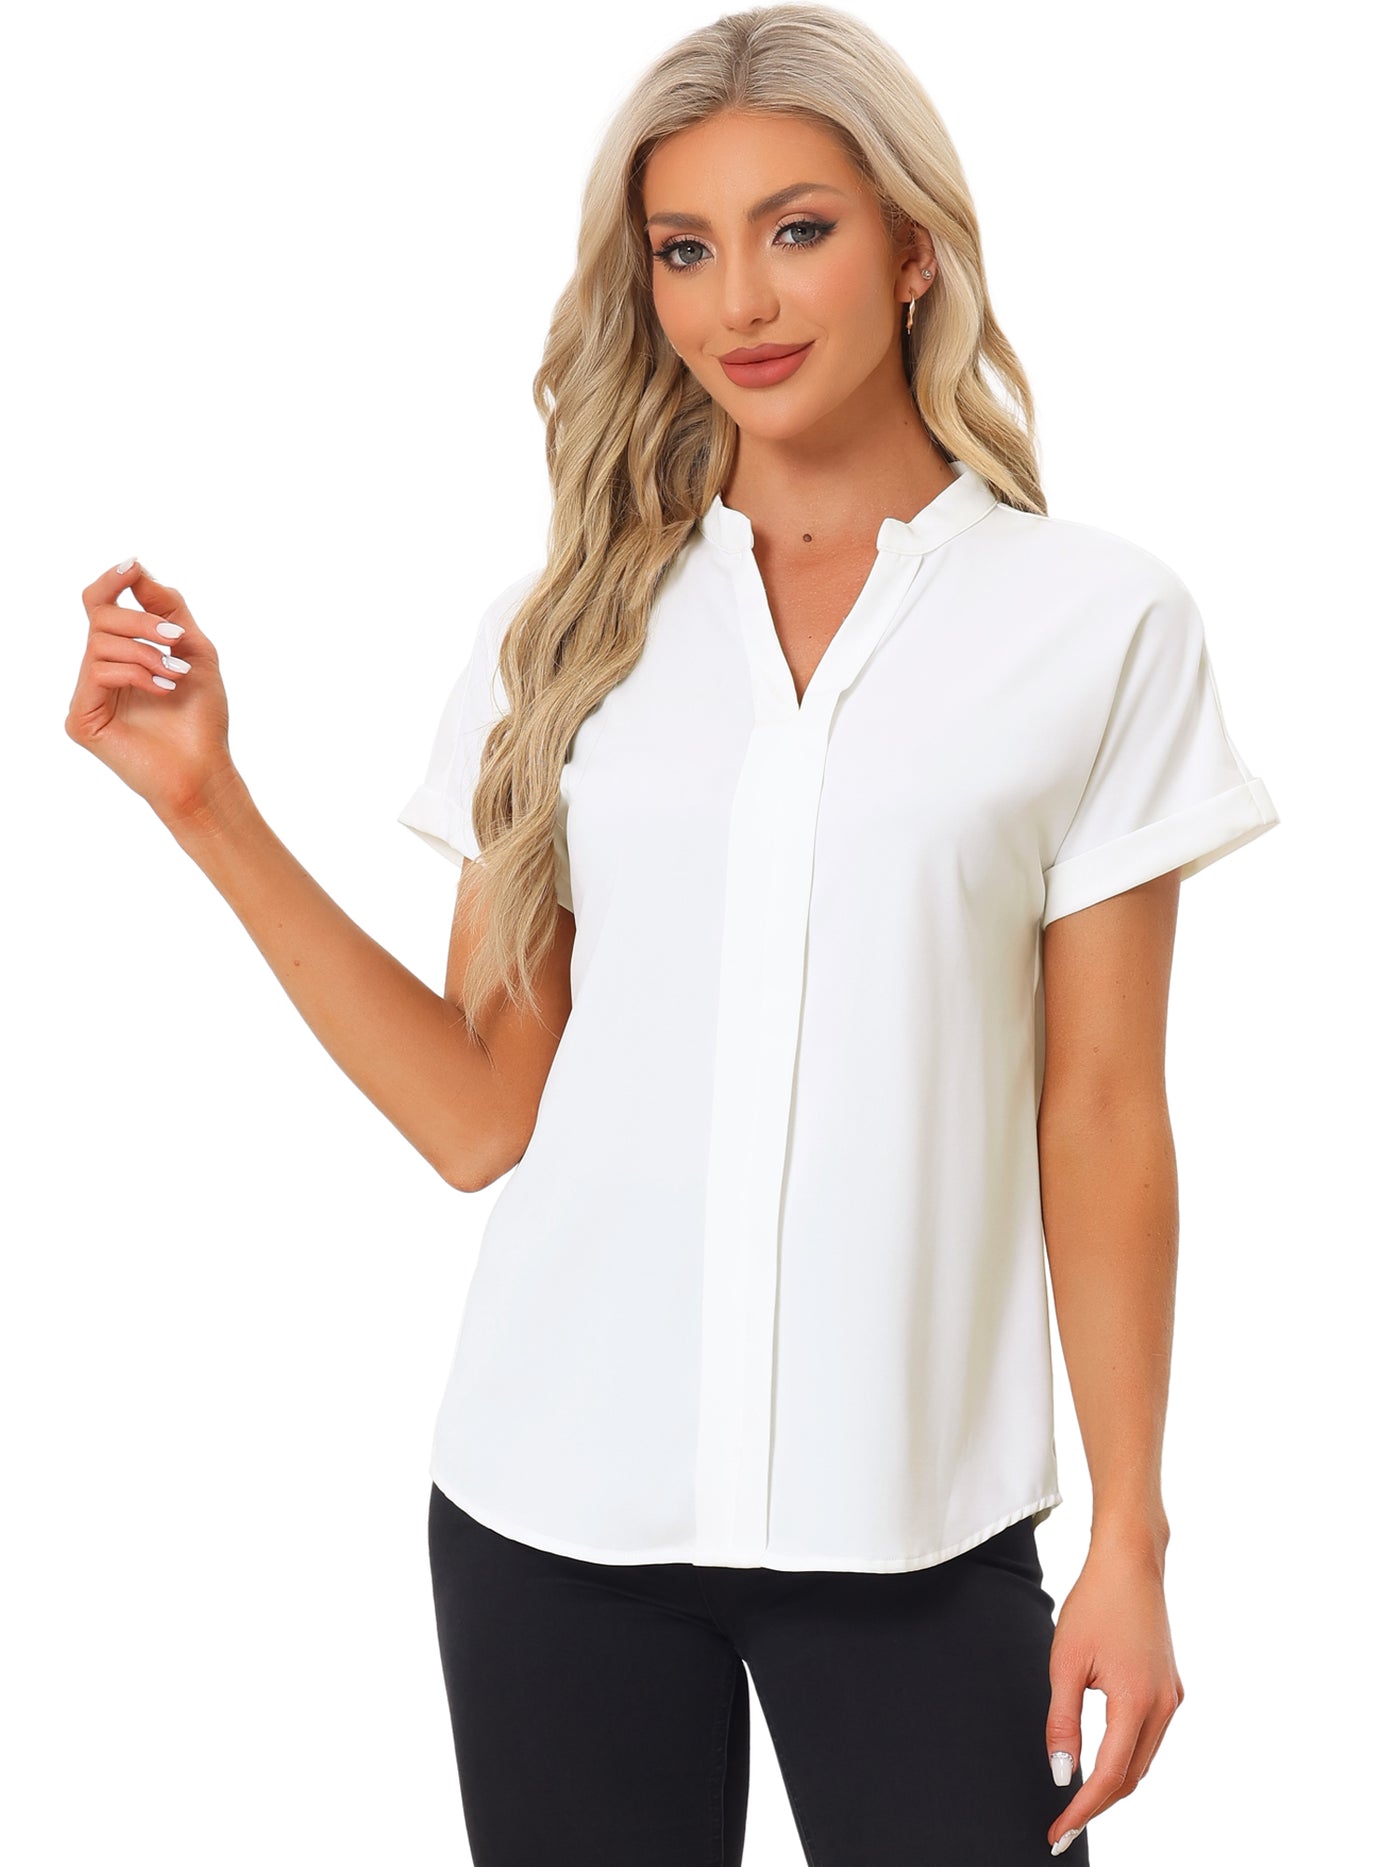 Allegra K Chiffon Blouse for Women's V Neck Short Sleeve Casual Peasant Top